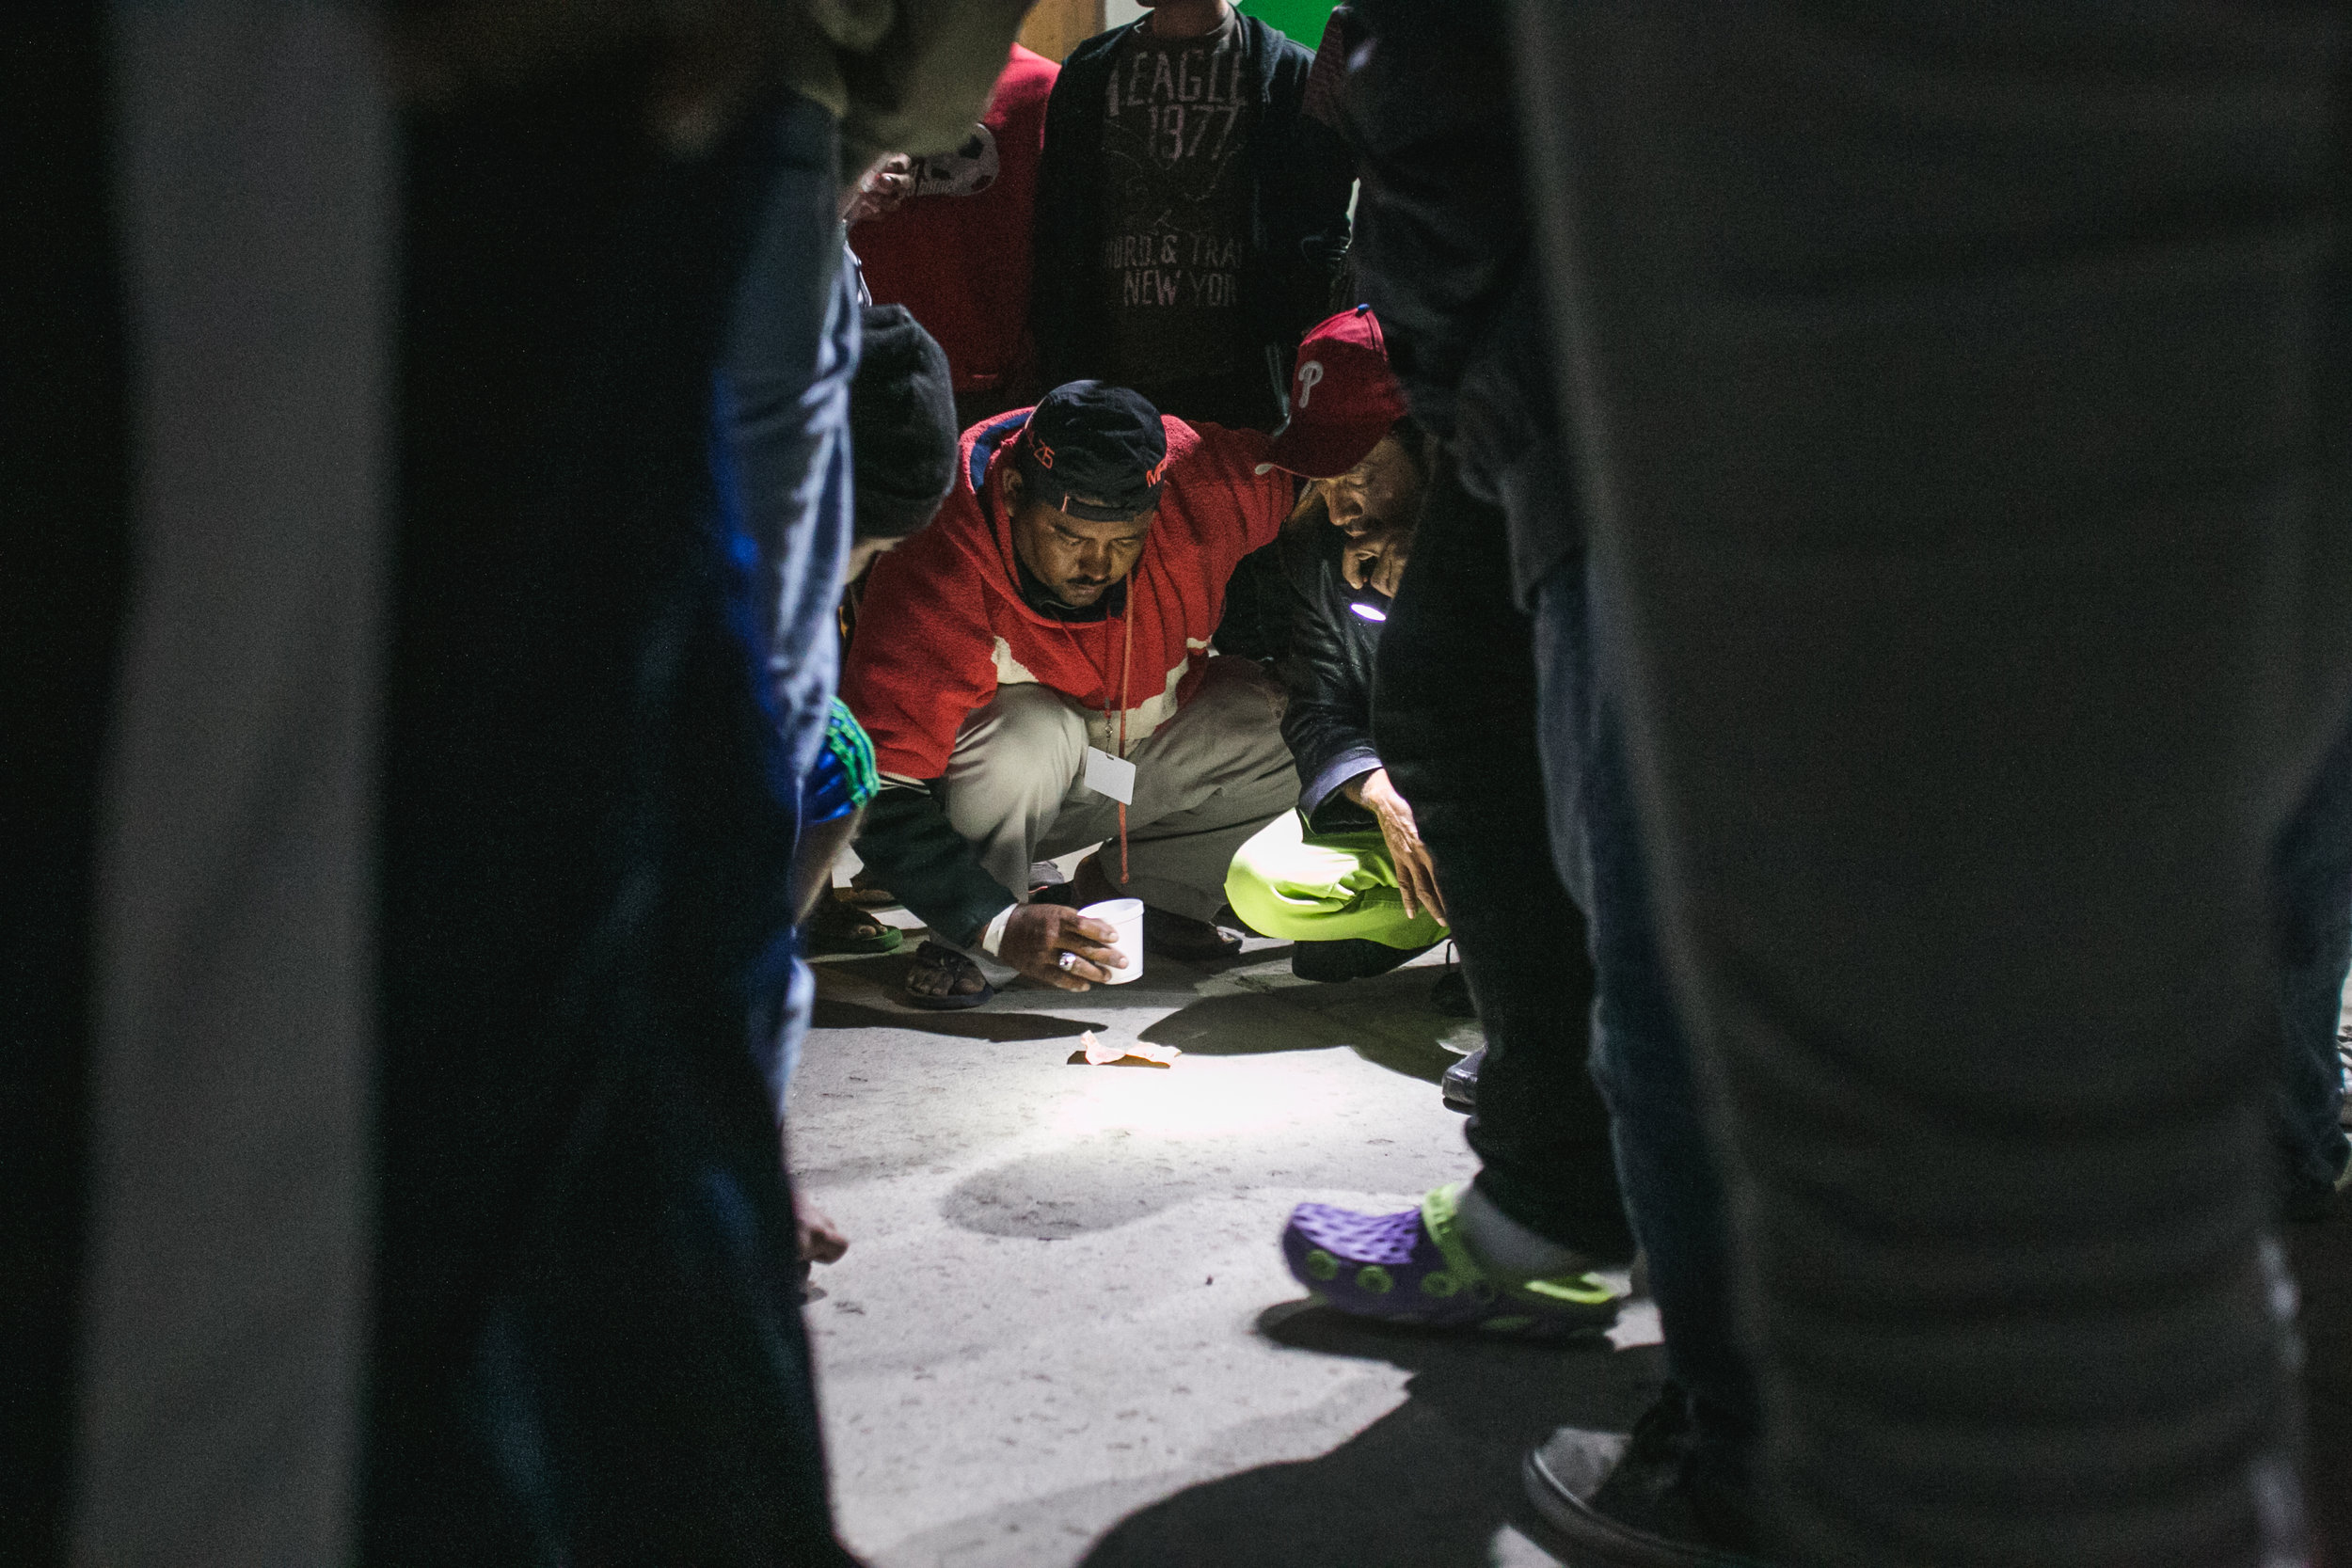  Men gamble with dice on the ground of the Barretal refugee compound located just outside Tijuana, Mexico. Gambling, soccer, and card games are among the most popular activities to pass the time. 